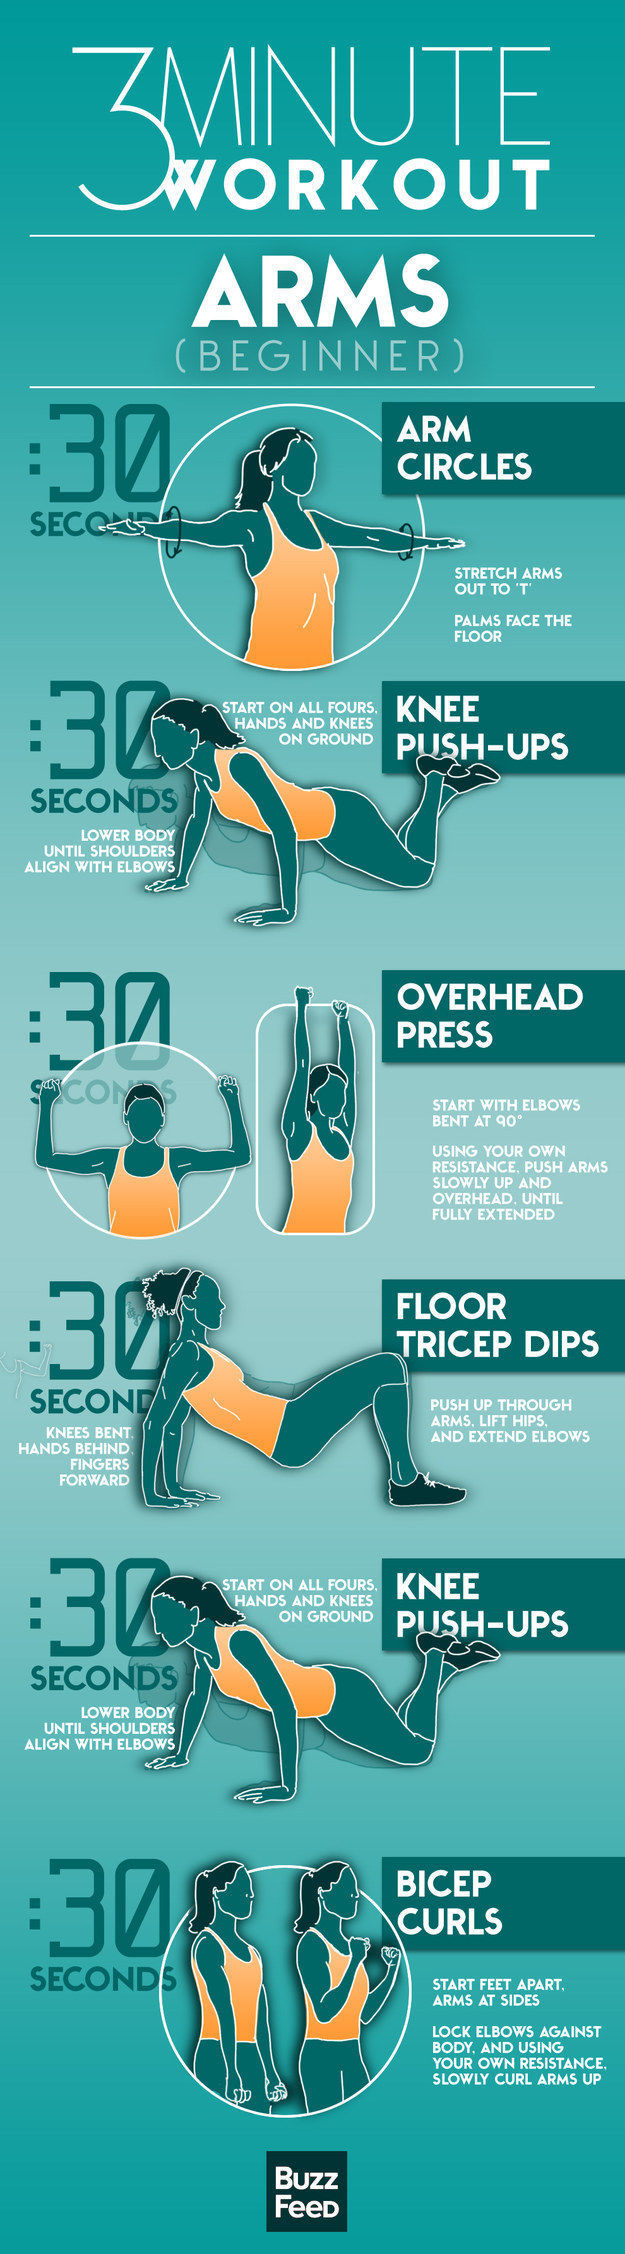 An Easy Three Minute Workout for Your Arms